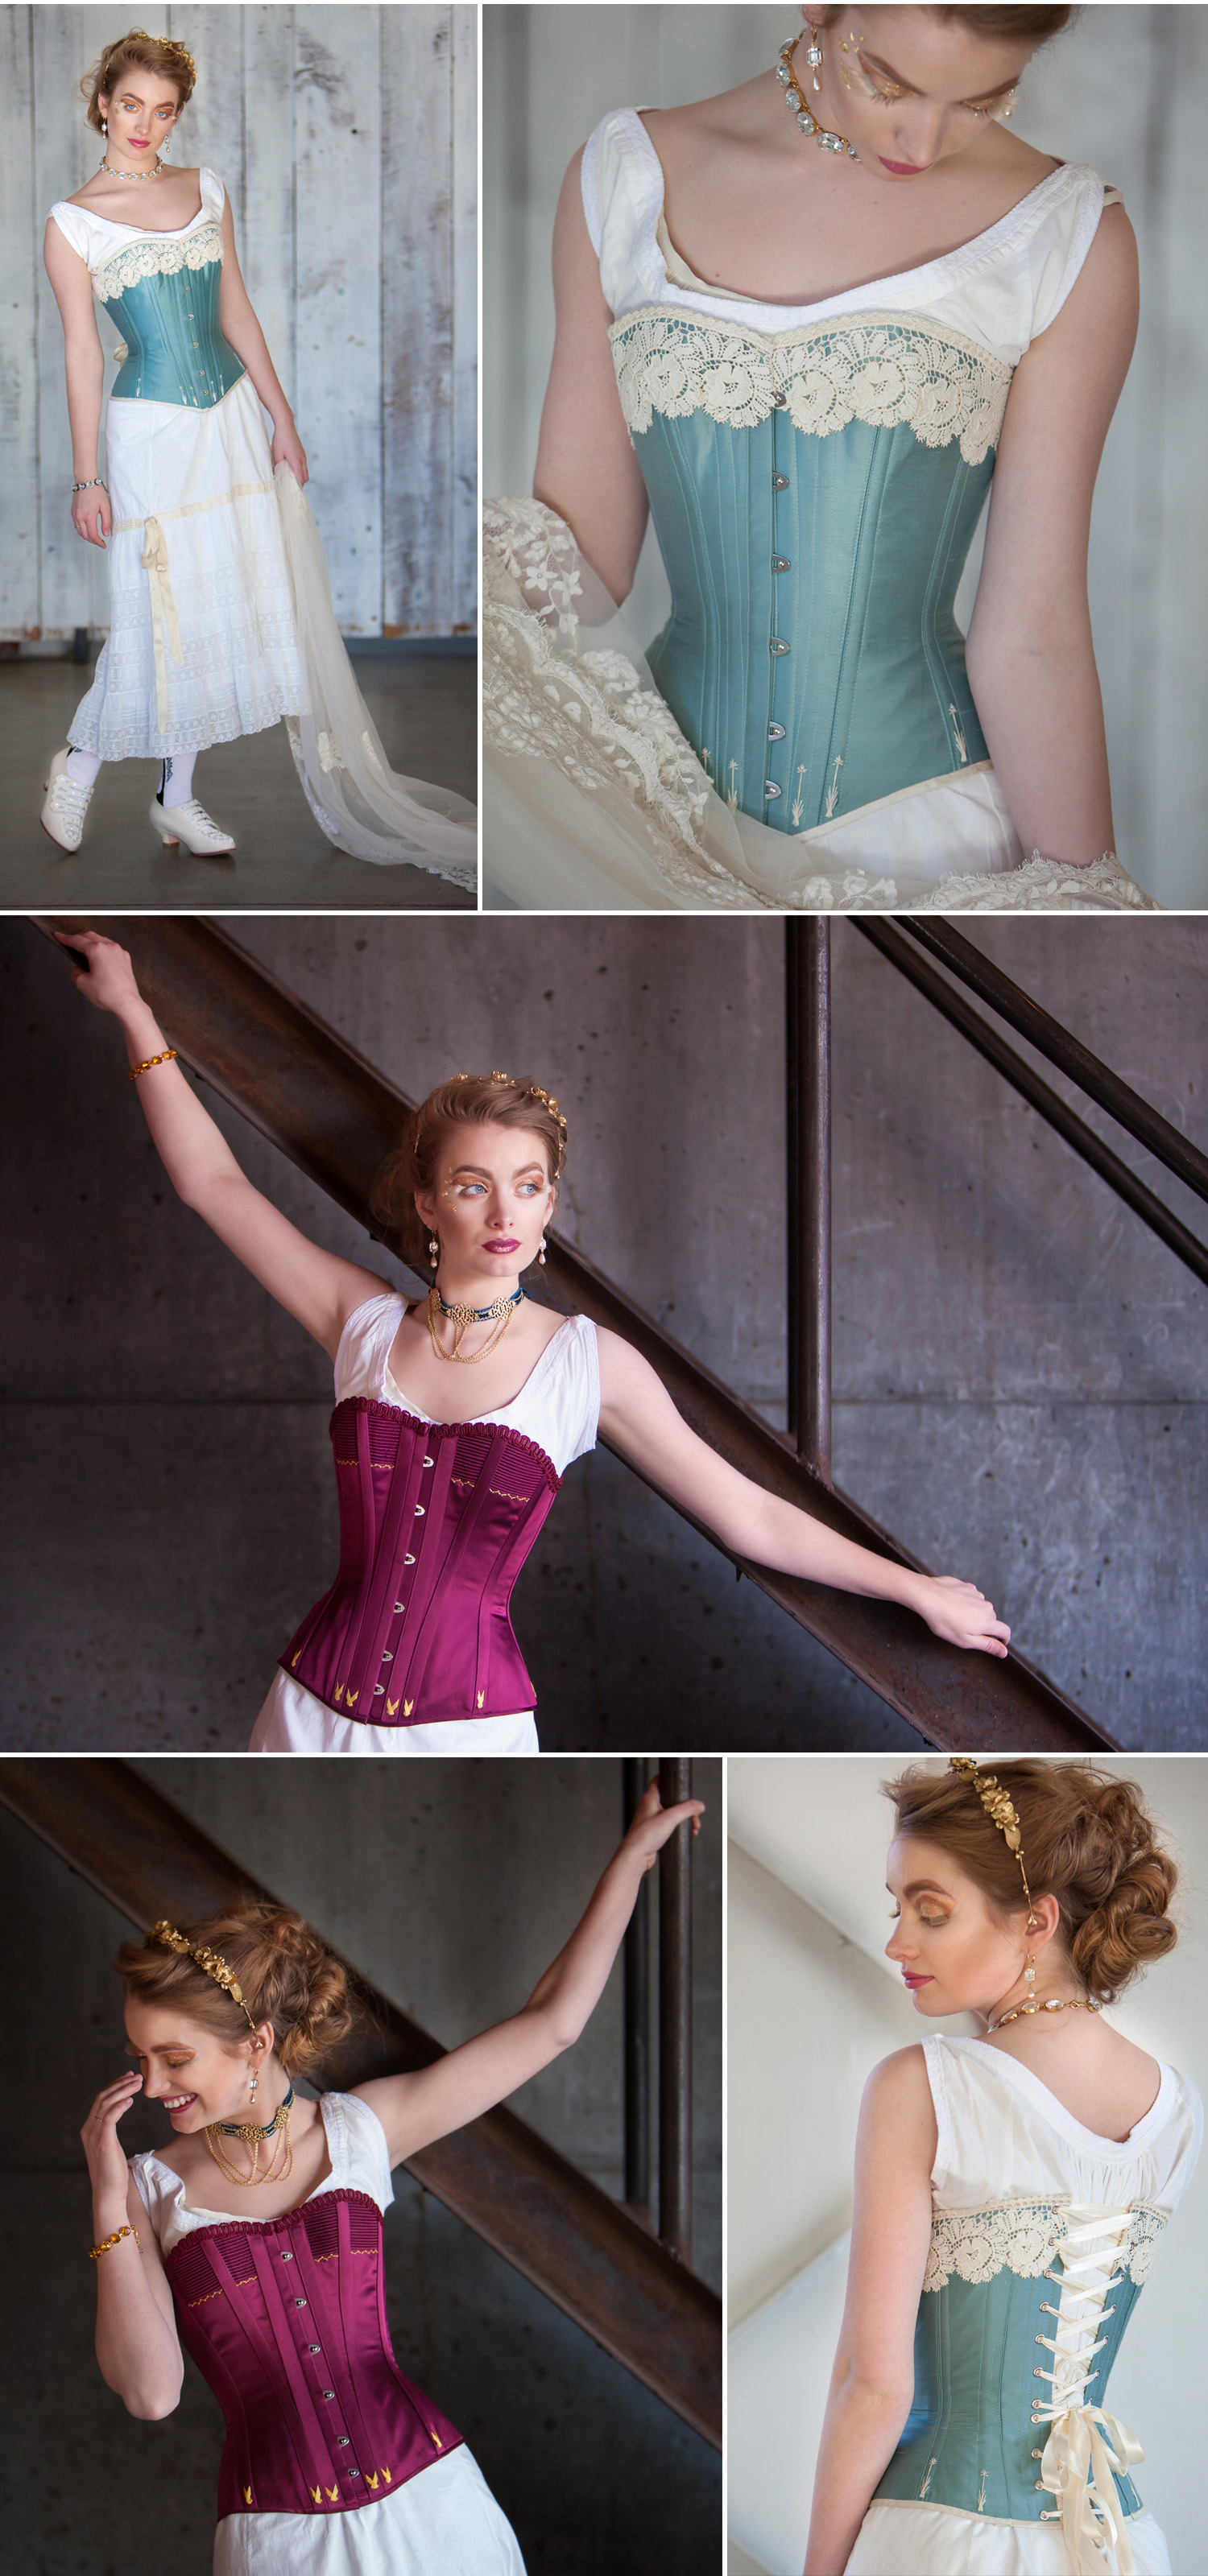 Sneak Peek  Styled High Fashion Session in Denver with Corset